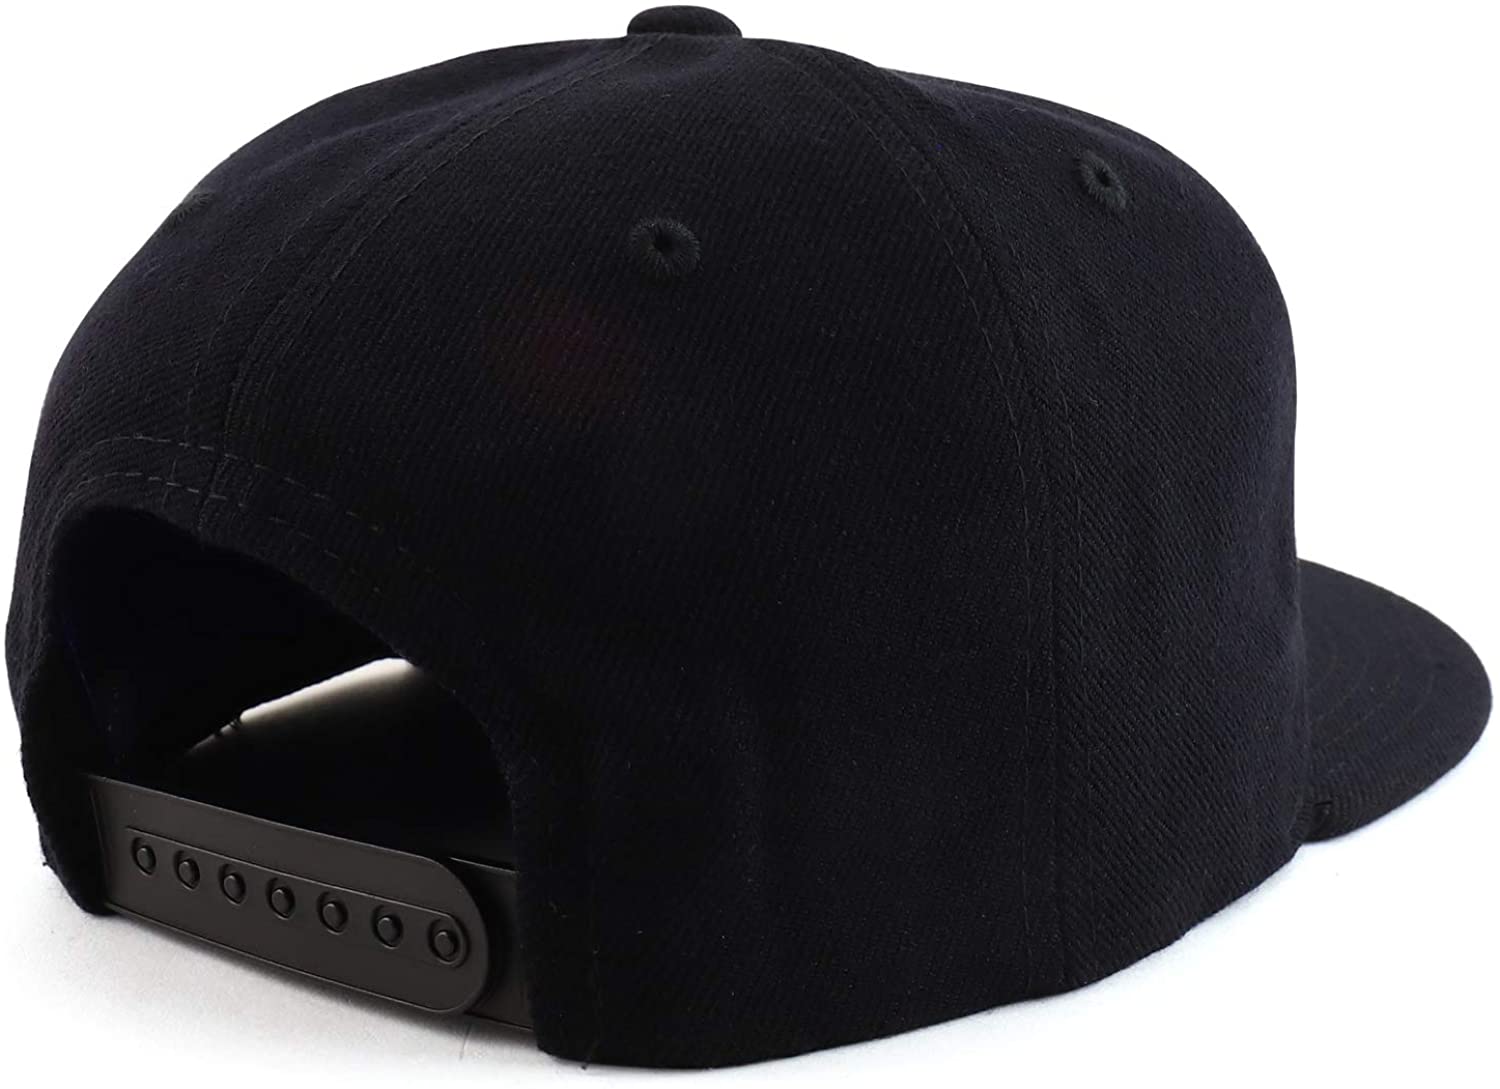 DECKY City Name Old English Embroidered Flat Bill Snapback Cap - Black - Compton